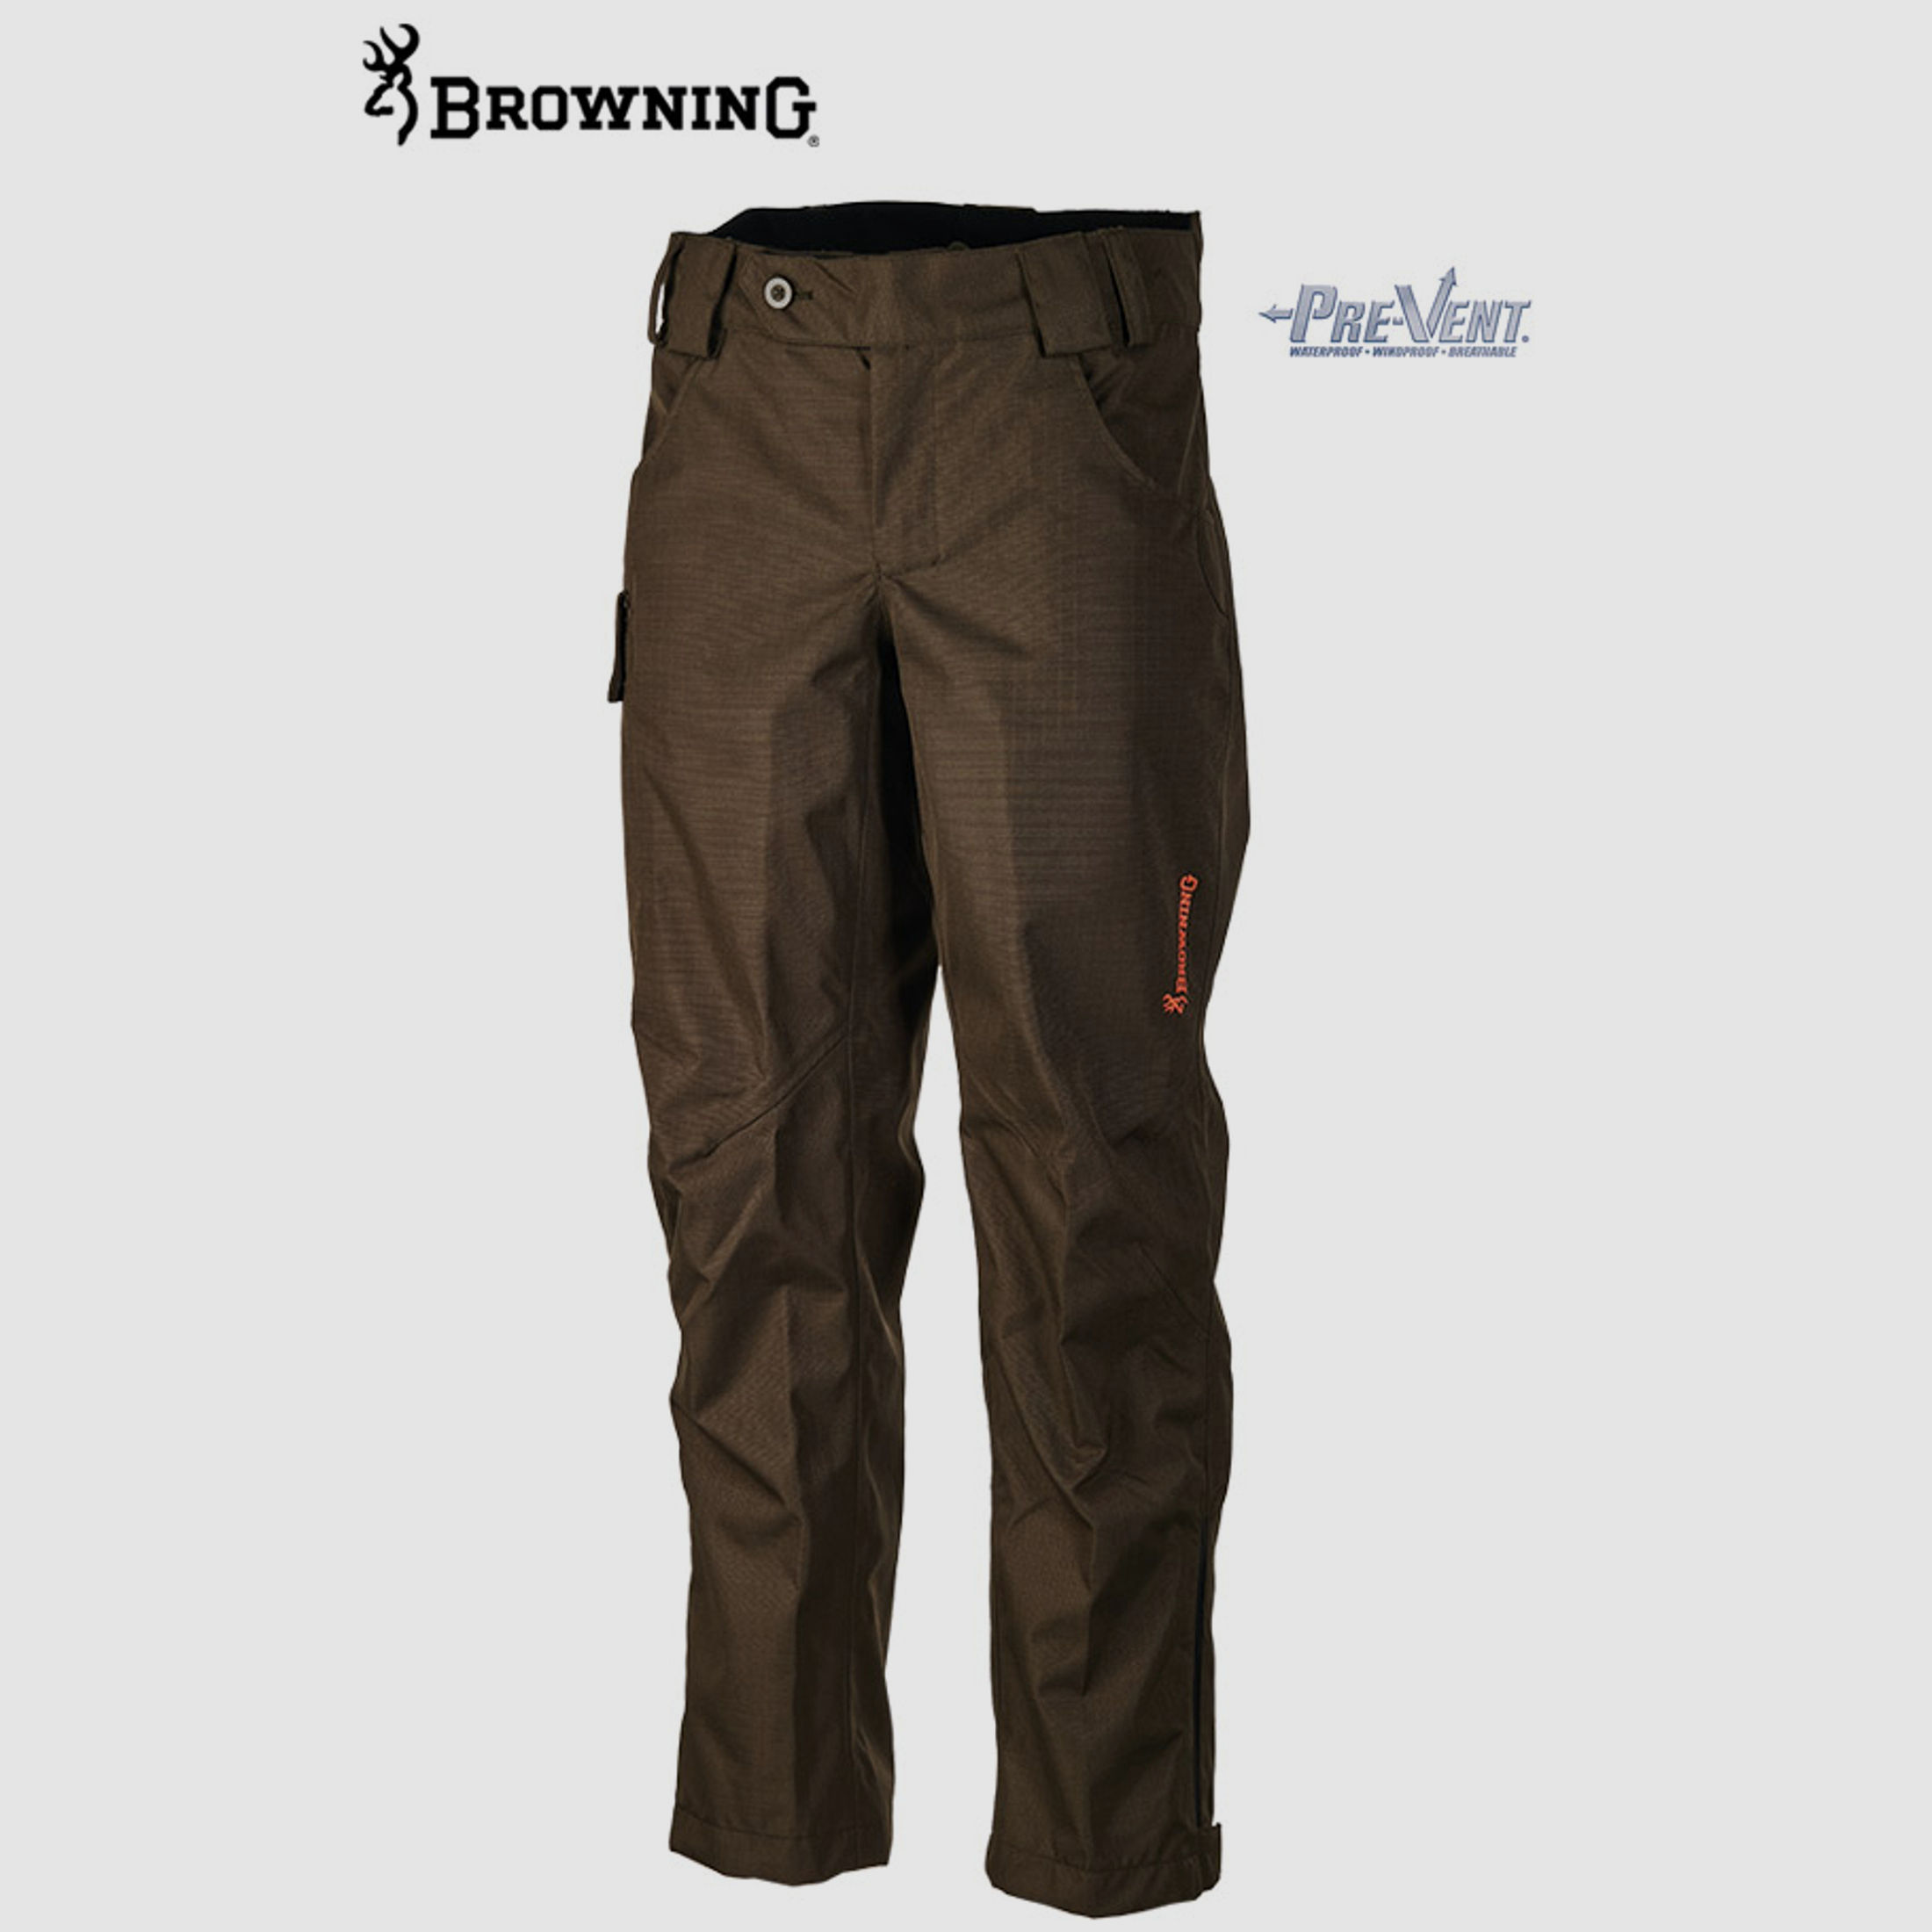 BROWNING Tracker One Protect Hose